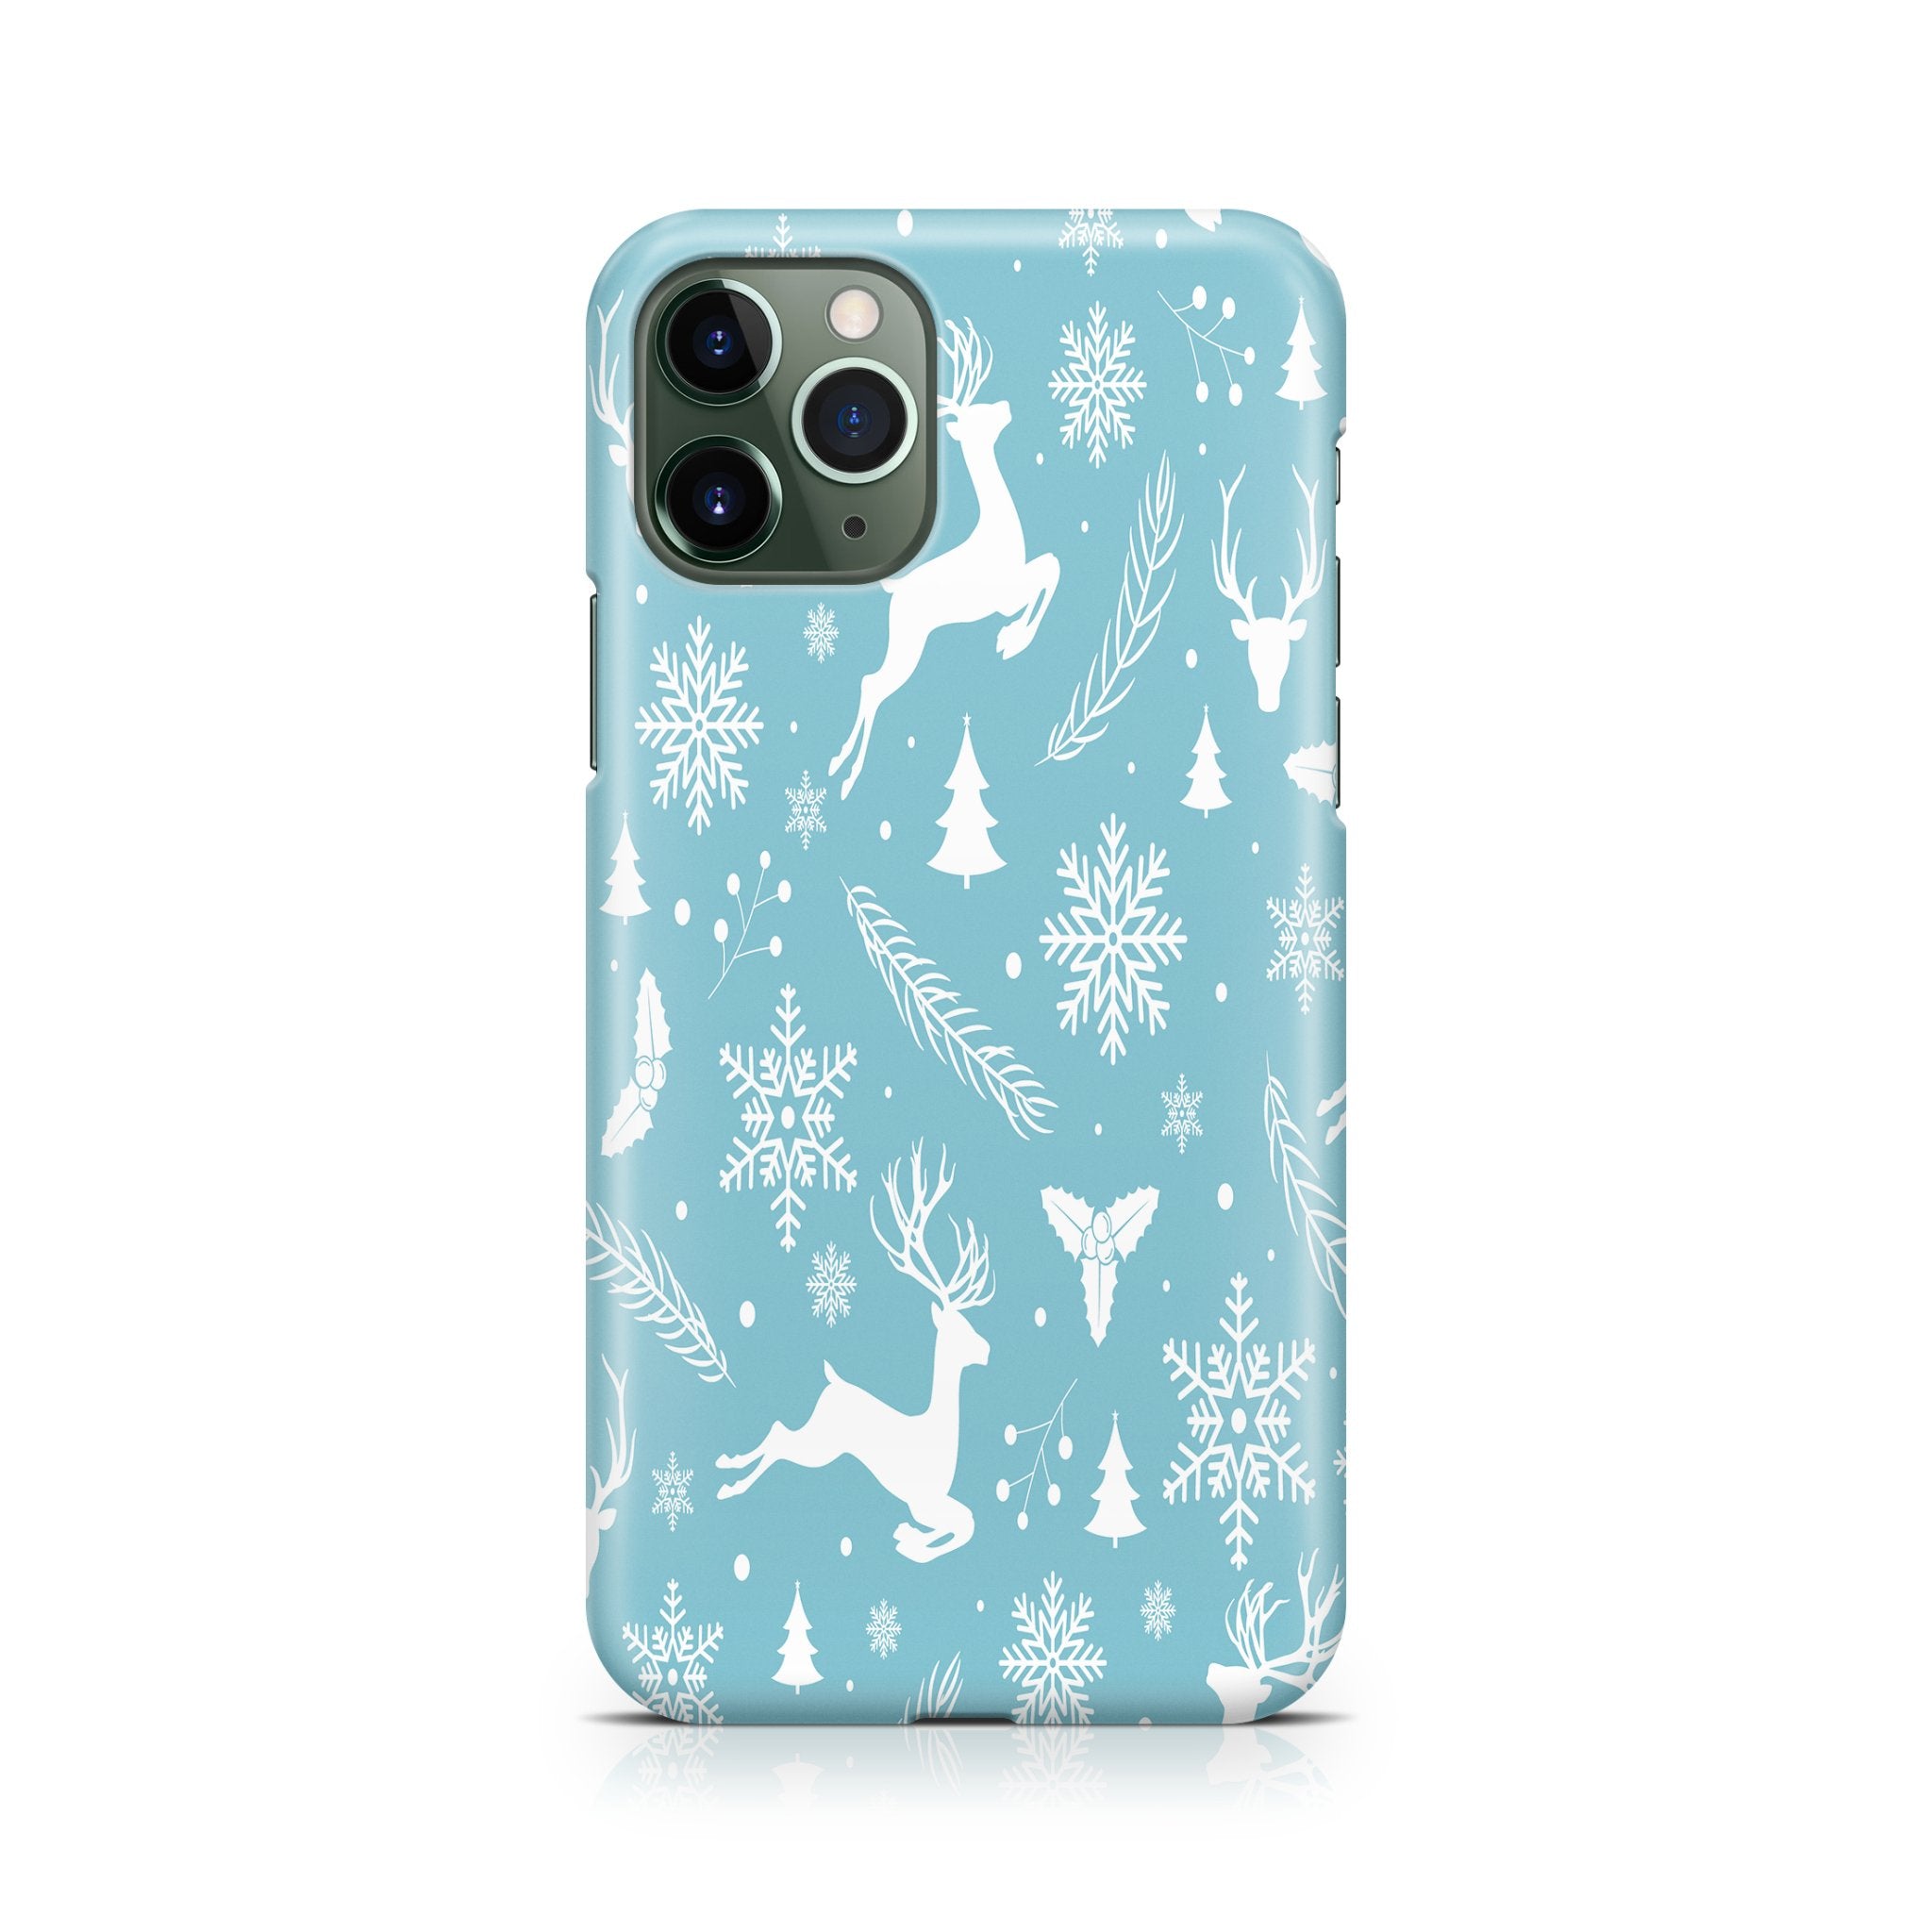 Winter Wonderland - iPhone phone case designs by CaseSwagger